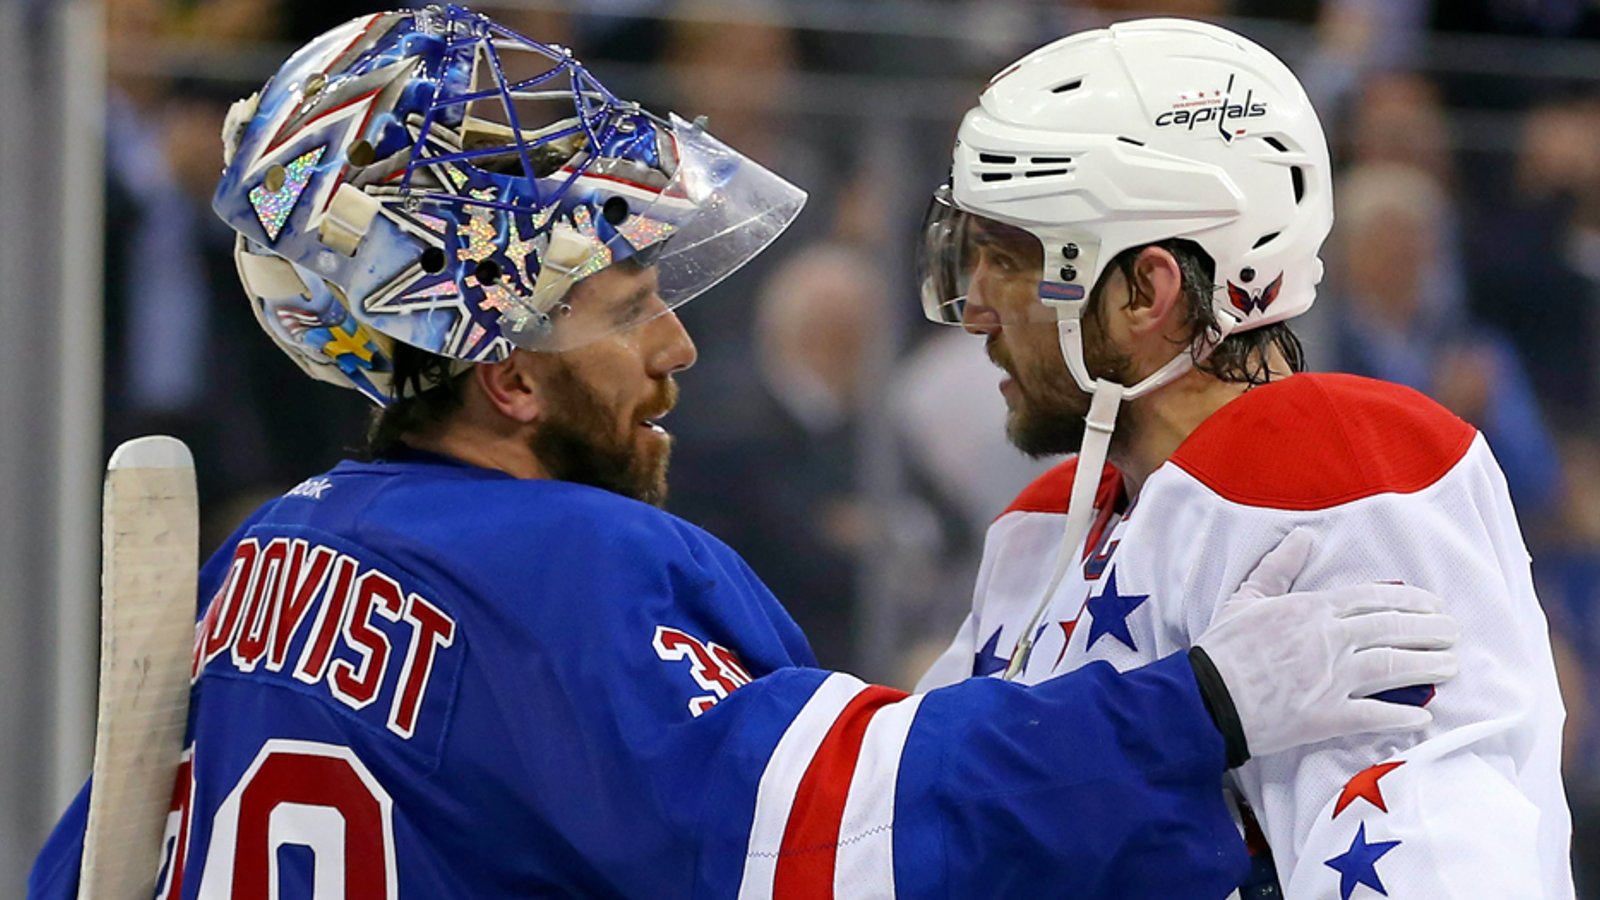 Capitals emerge as clear frontrunners for Lundqvist, per report from Bob McKenzie